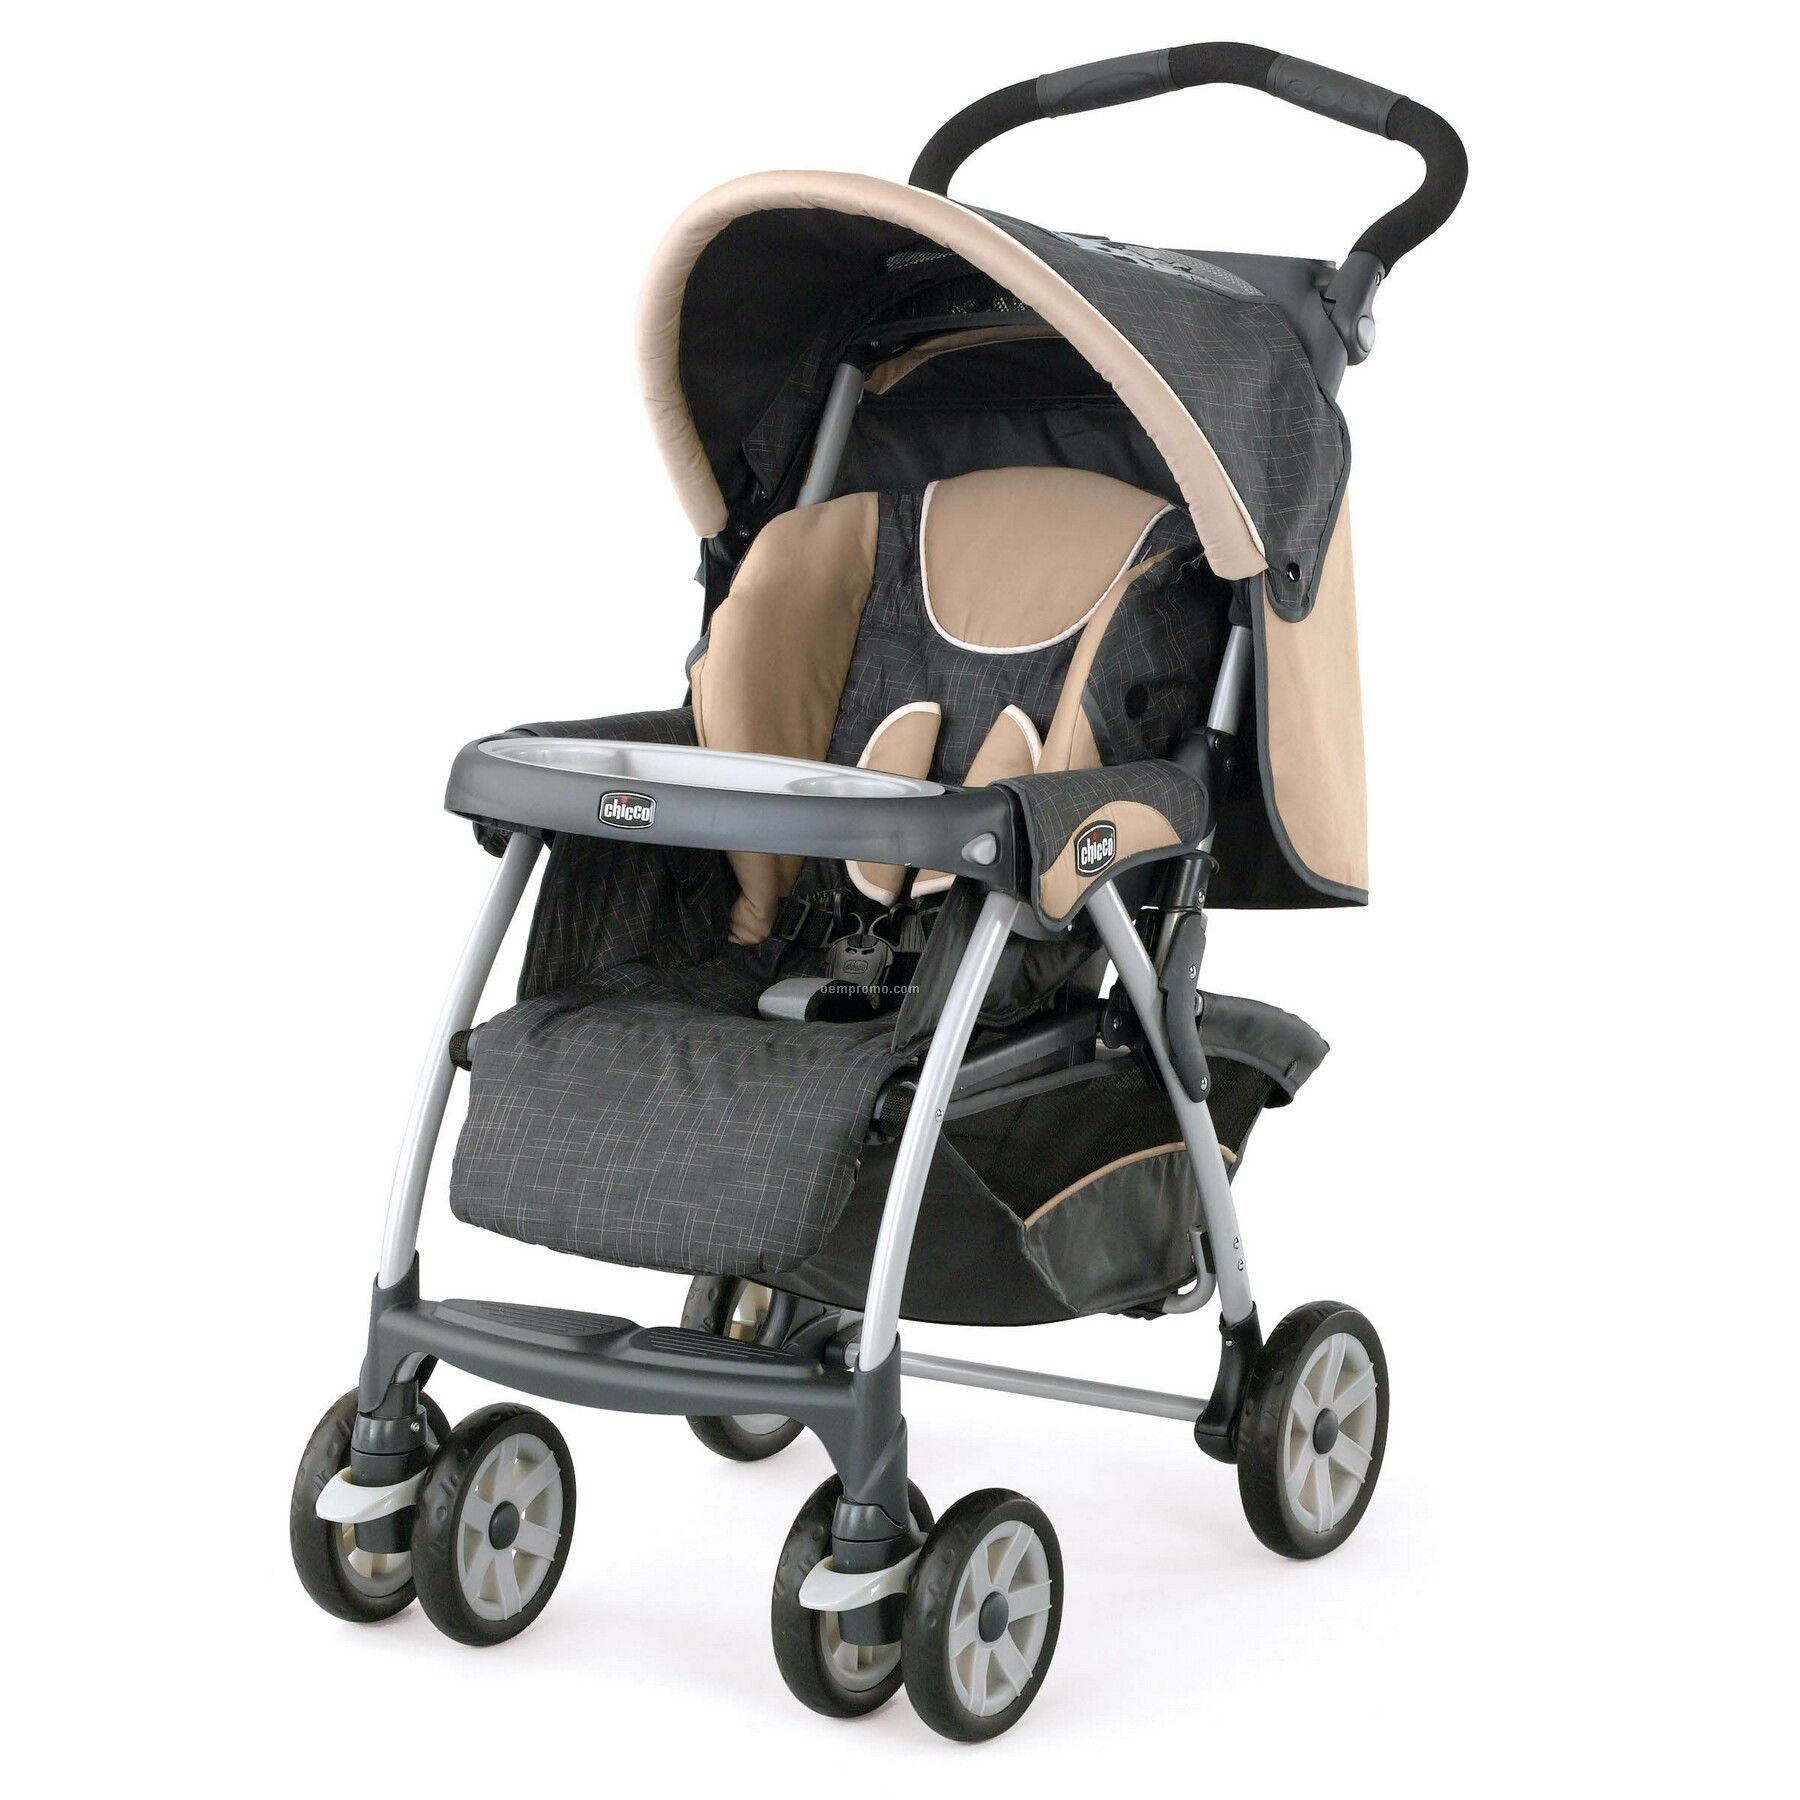 Chicco Cortina Full Size Stroller, Hazelwood